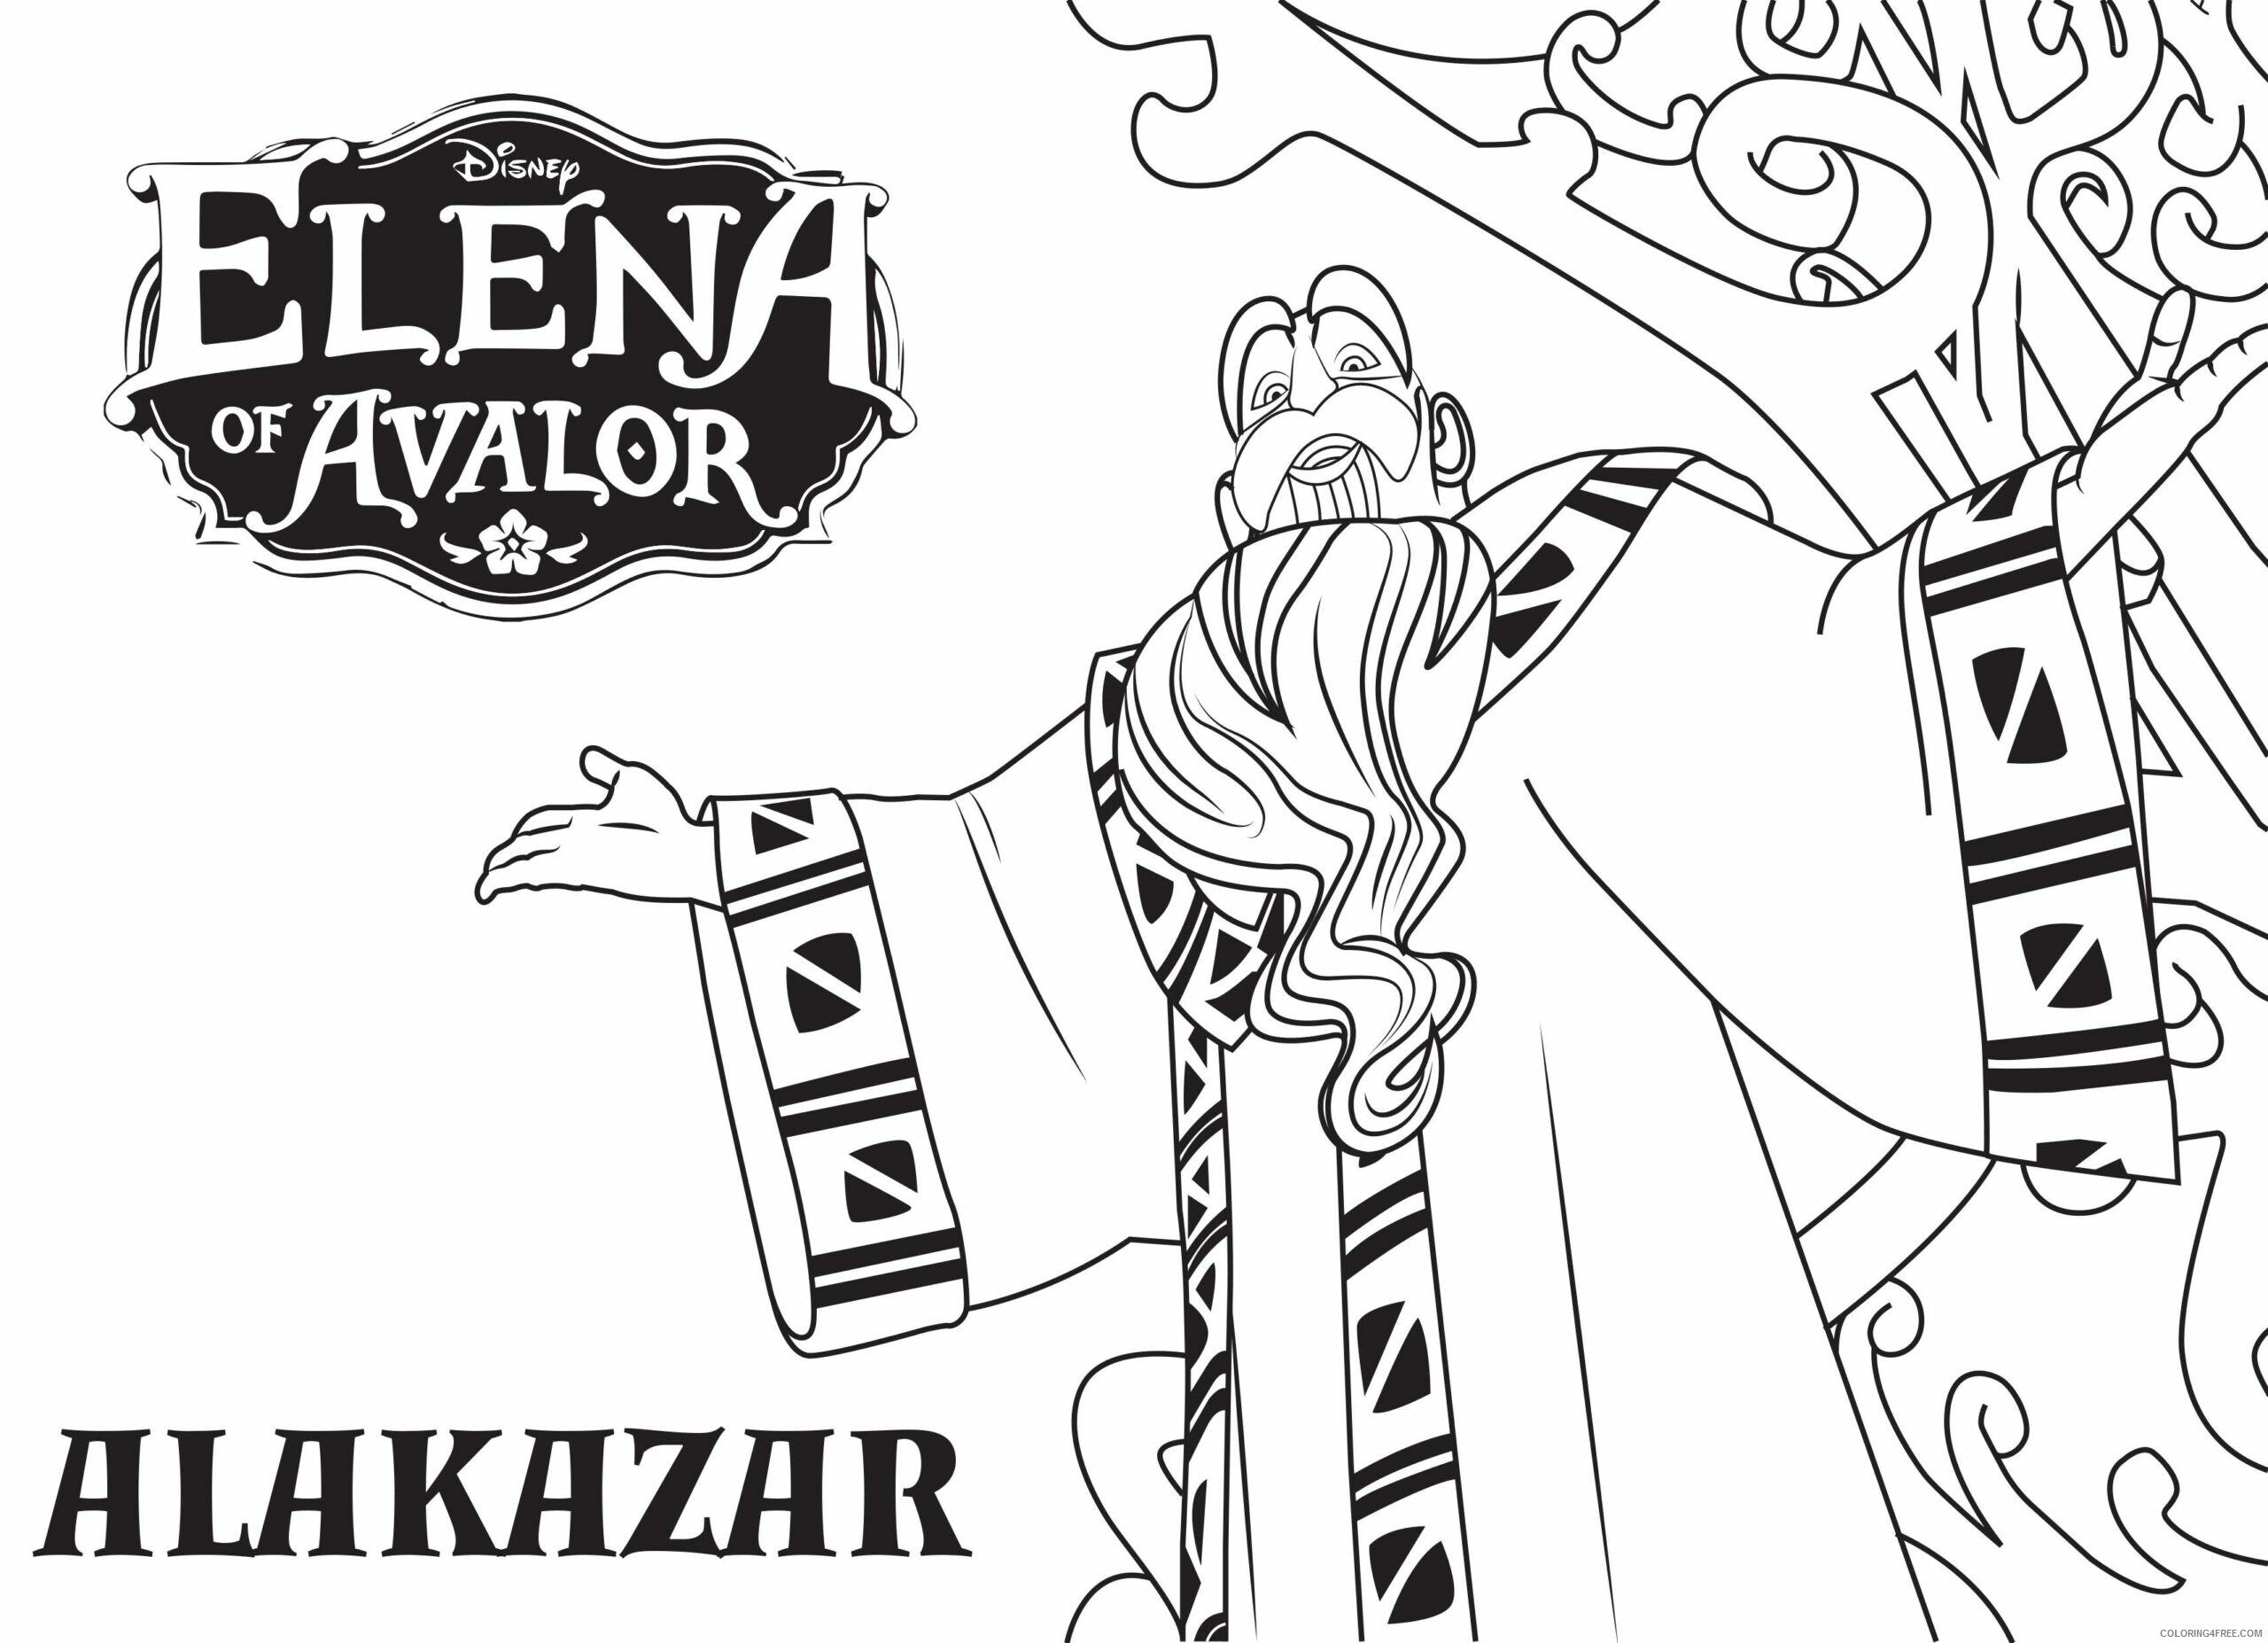 Elena of Avalor Coloring Pages TV Film Alakazar Printable 2020 02629 Coloring4free